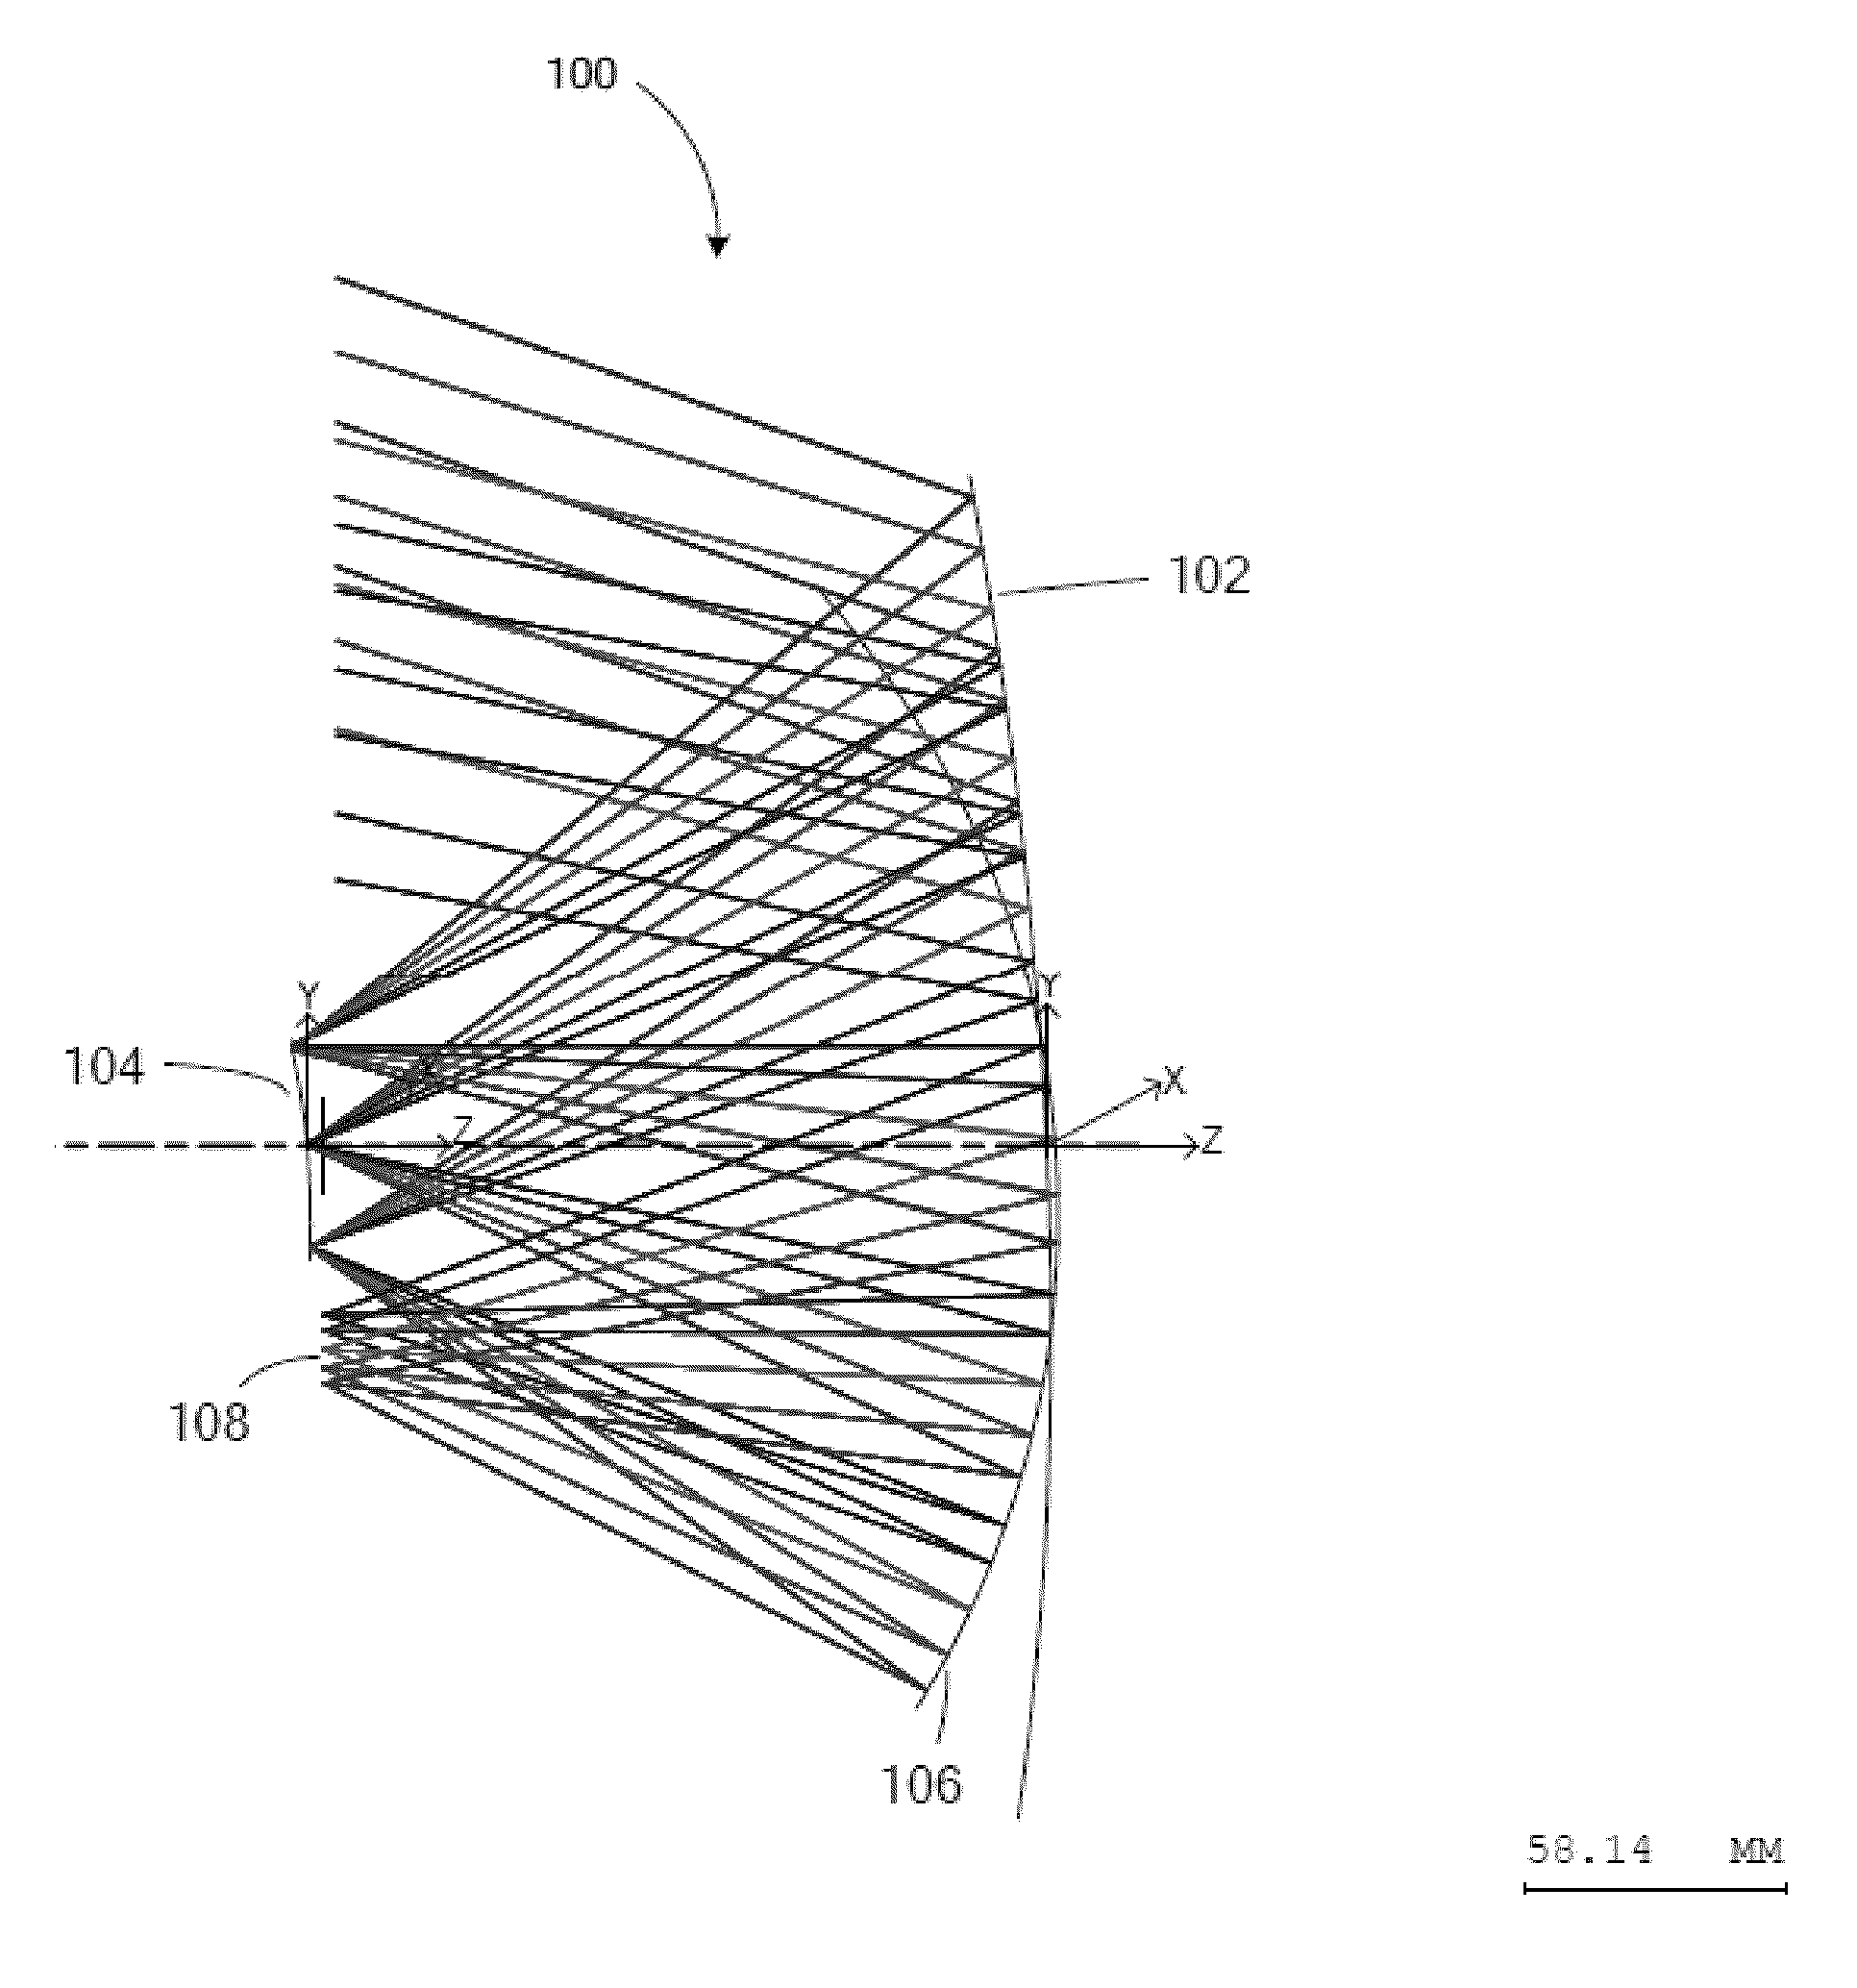 Off-axial three-mirror optical system with freeform surfaces